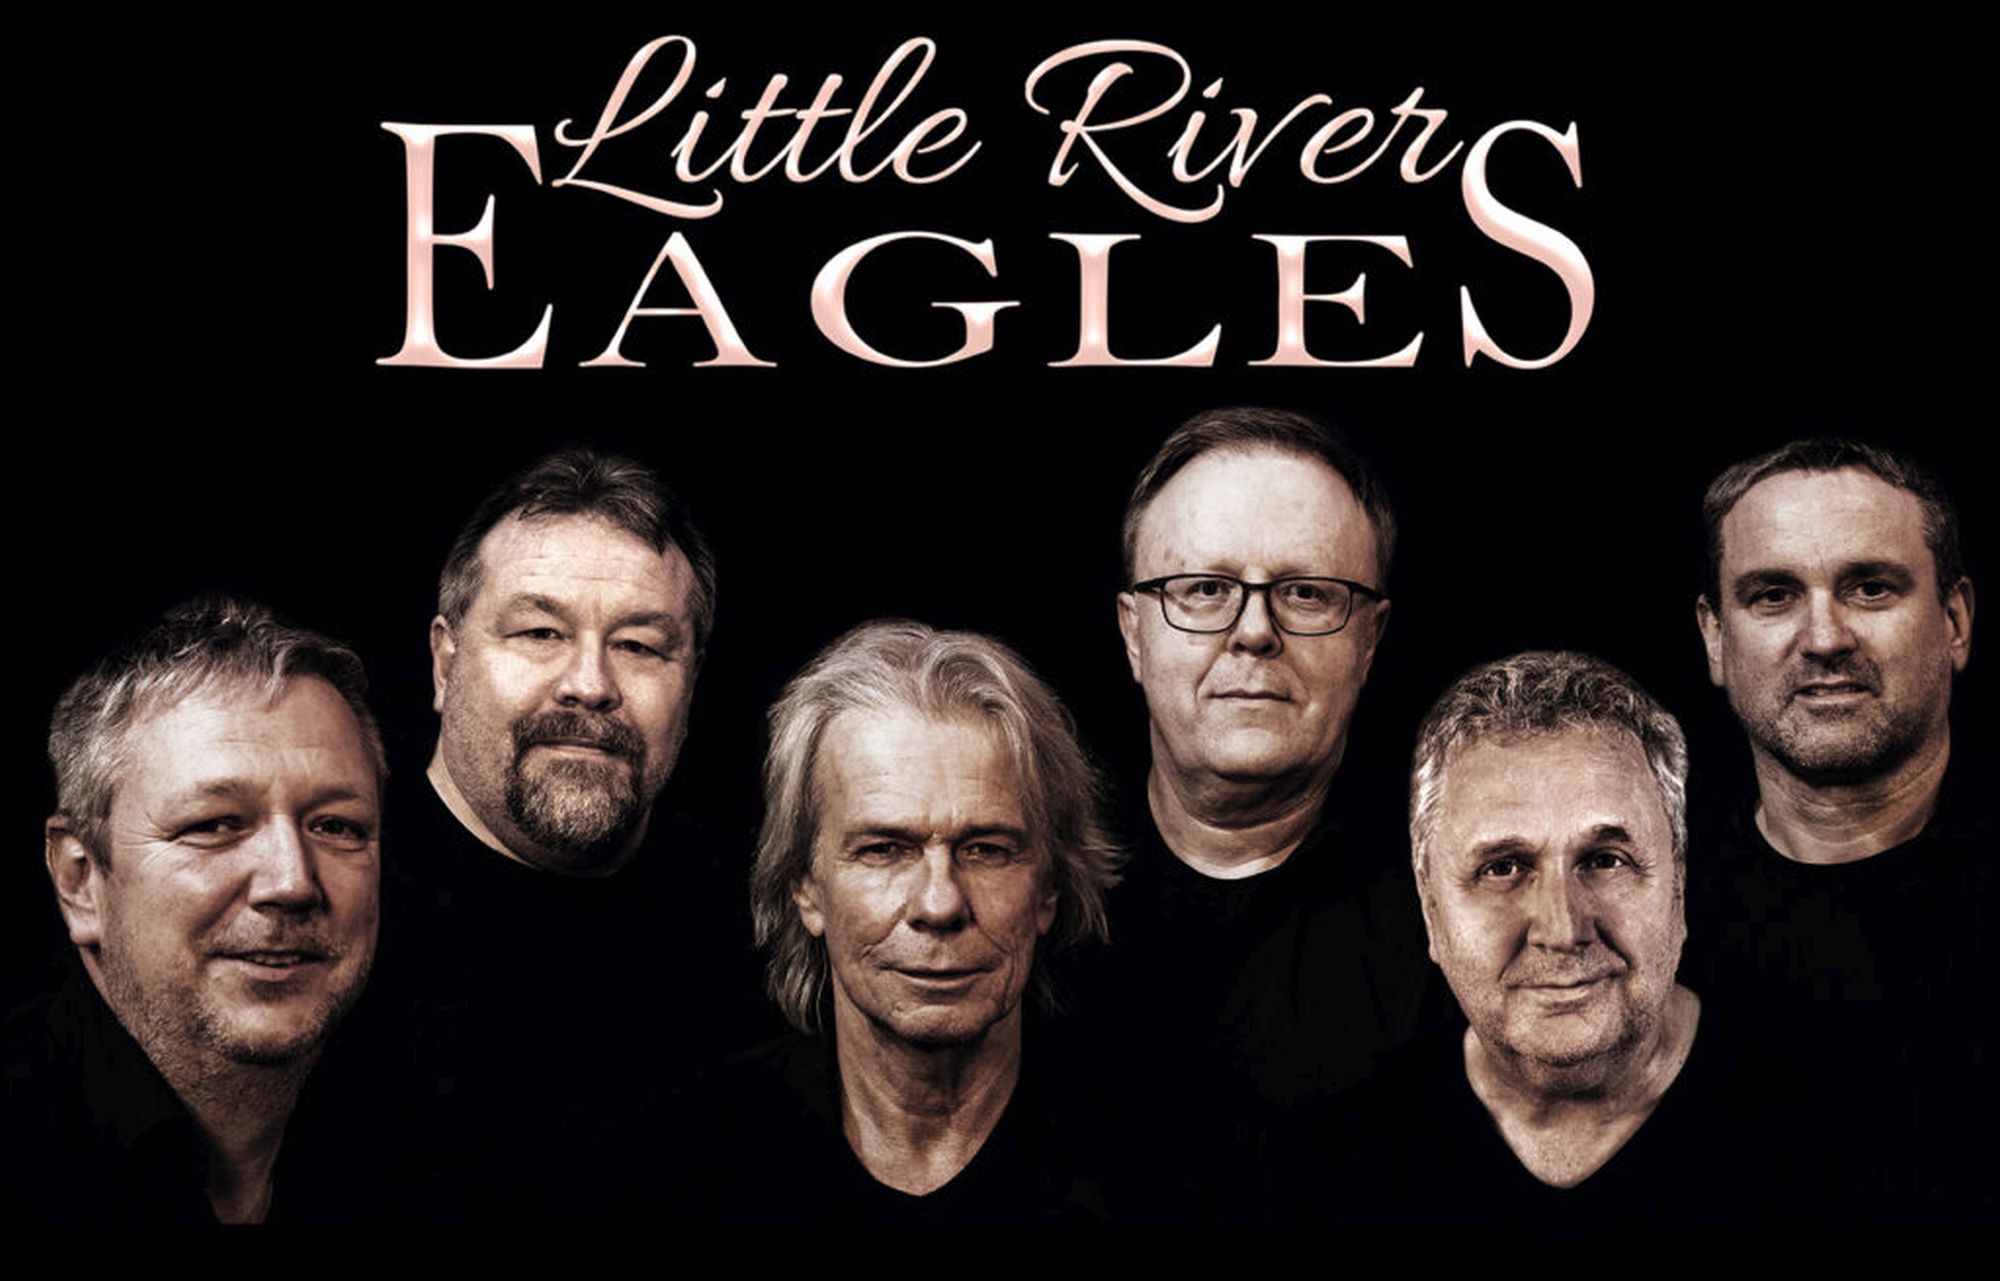 LITTLE-RIVER-EAGLES - The very best of 